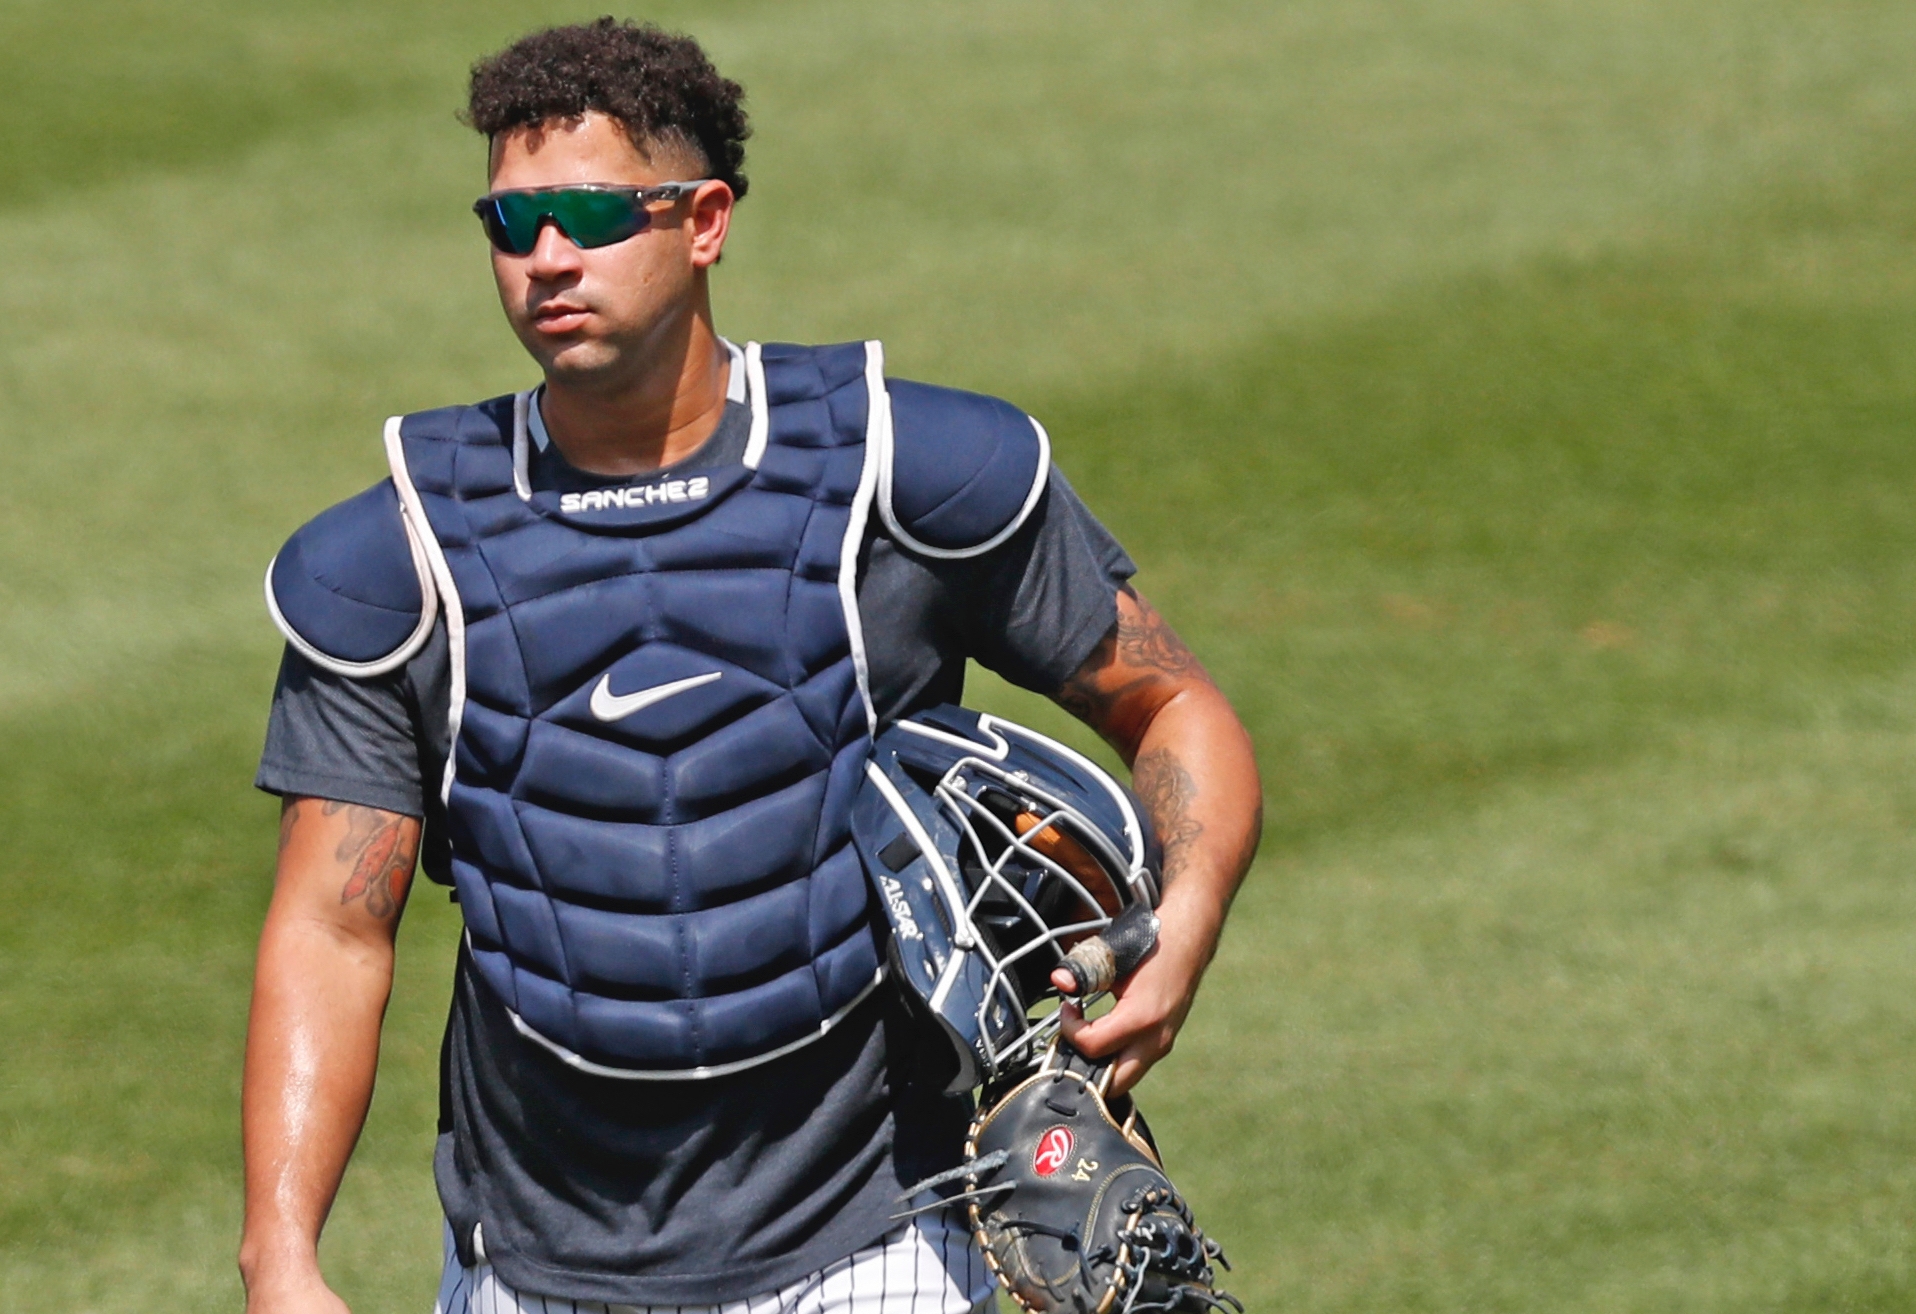 New York Yankees: Excitement, but caution for Gary Sanchez